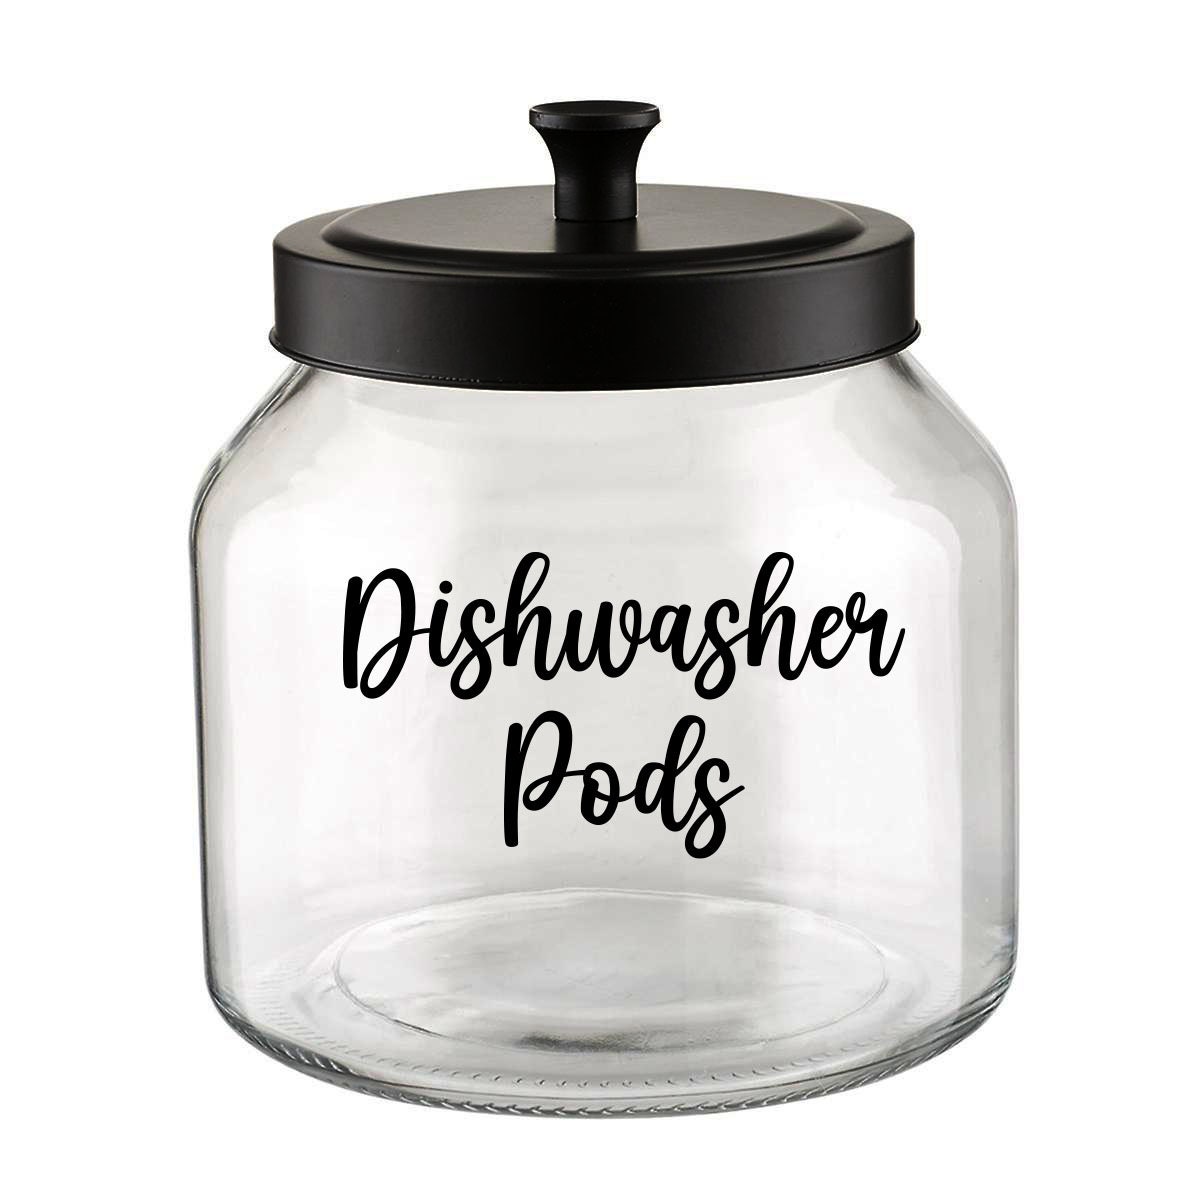  Farmhouse Dishwasher Pods Container with Lid – Metal Dishwasher  Pod Holder for Kitchen Organization, Dish Pods Storage Box Holds Over 100  Pacs : Appliances